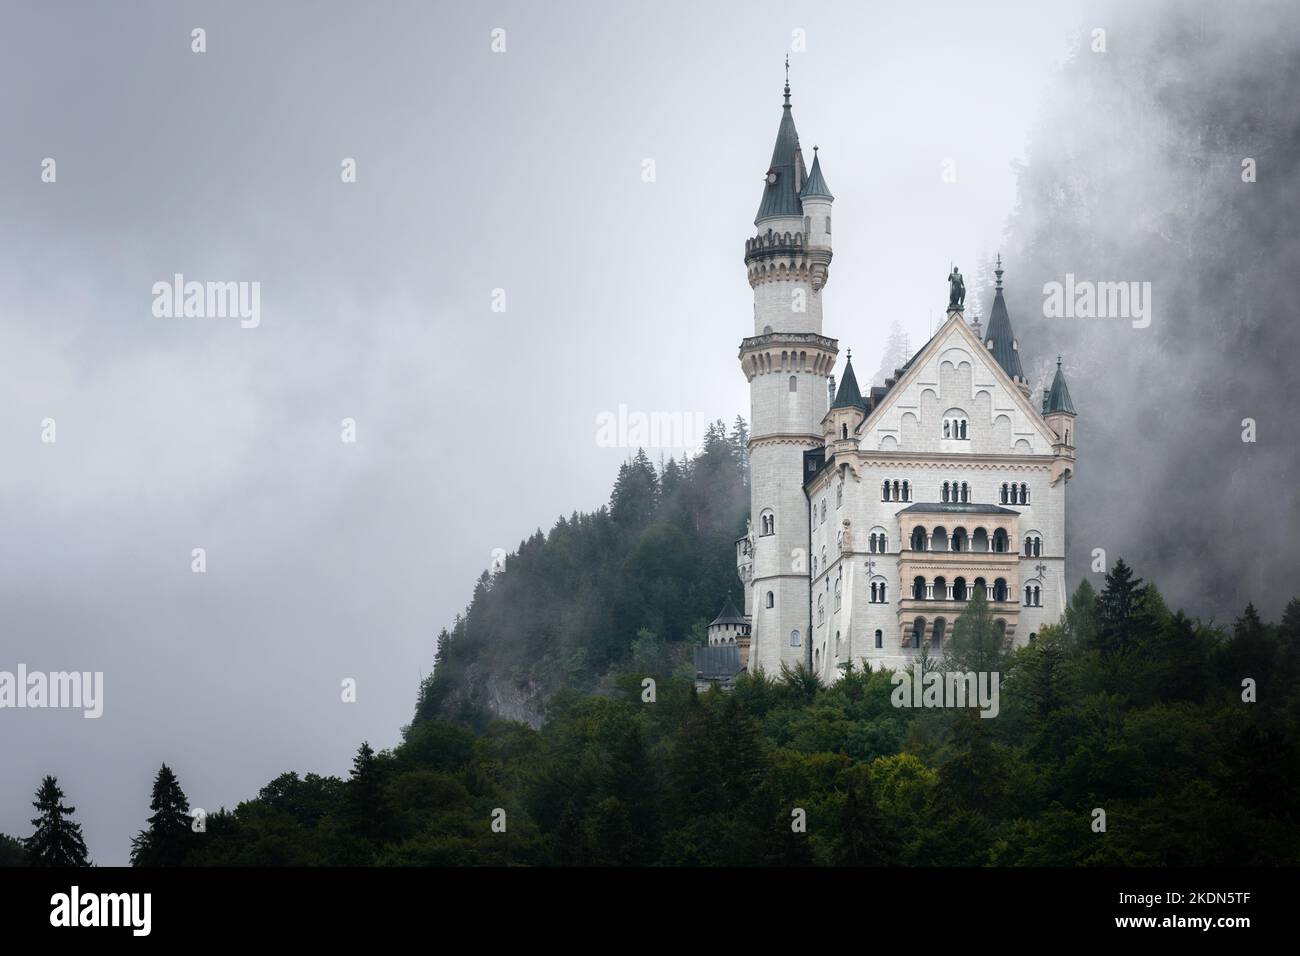 Castle of Neuschwanstein in Fussen, stunning neo gothic palace of the XIX century and most famous landmark of Bavaria, Germany. View from afar on a ra Stock Photo